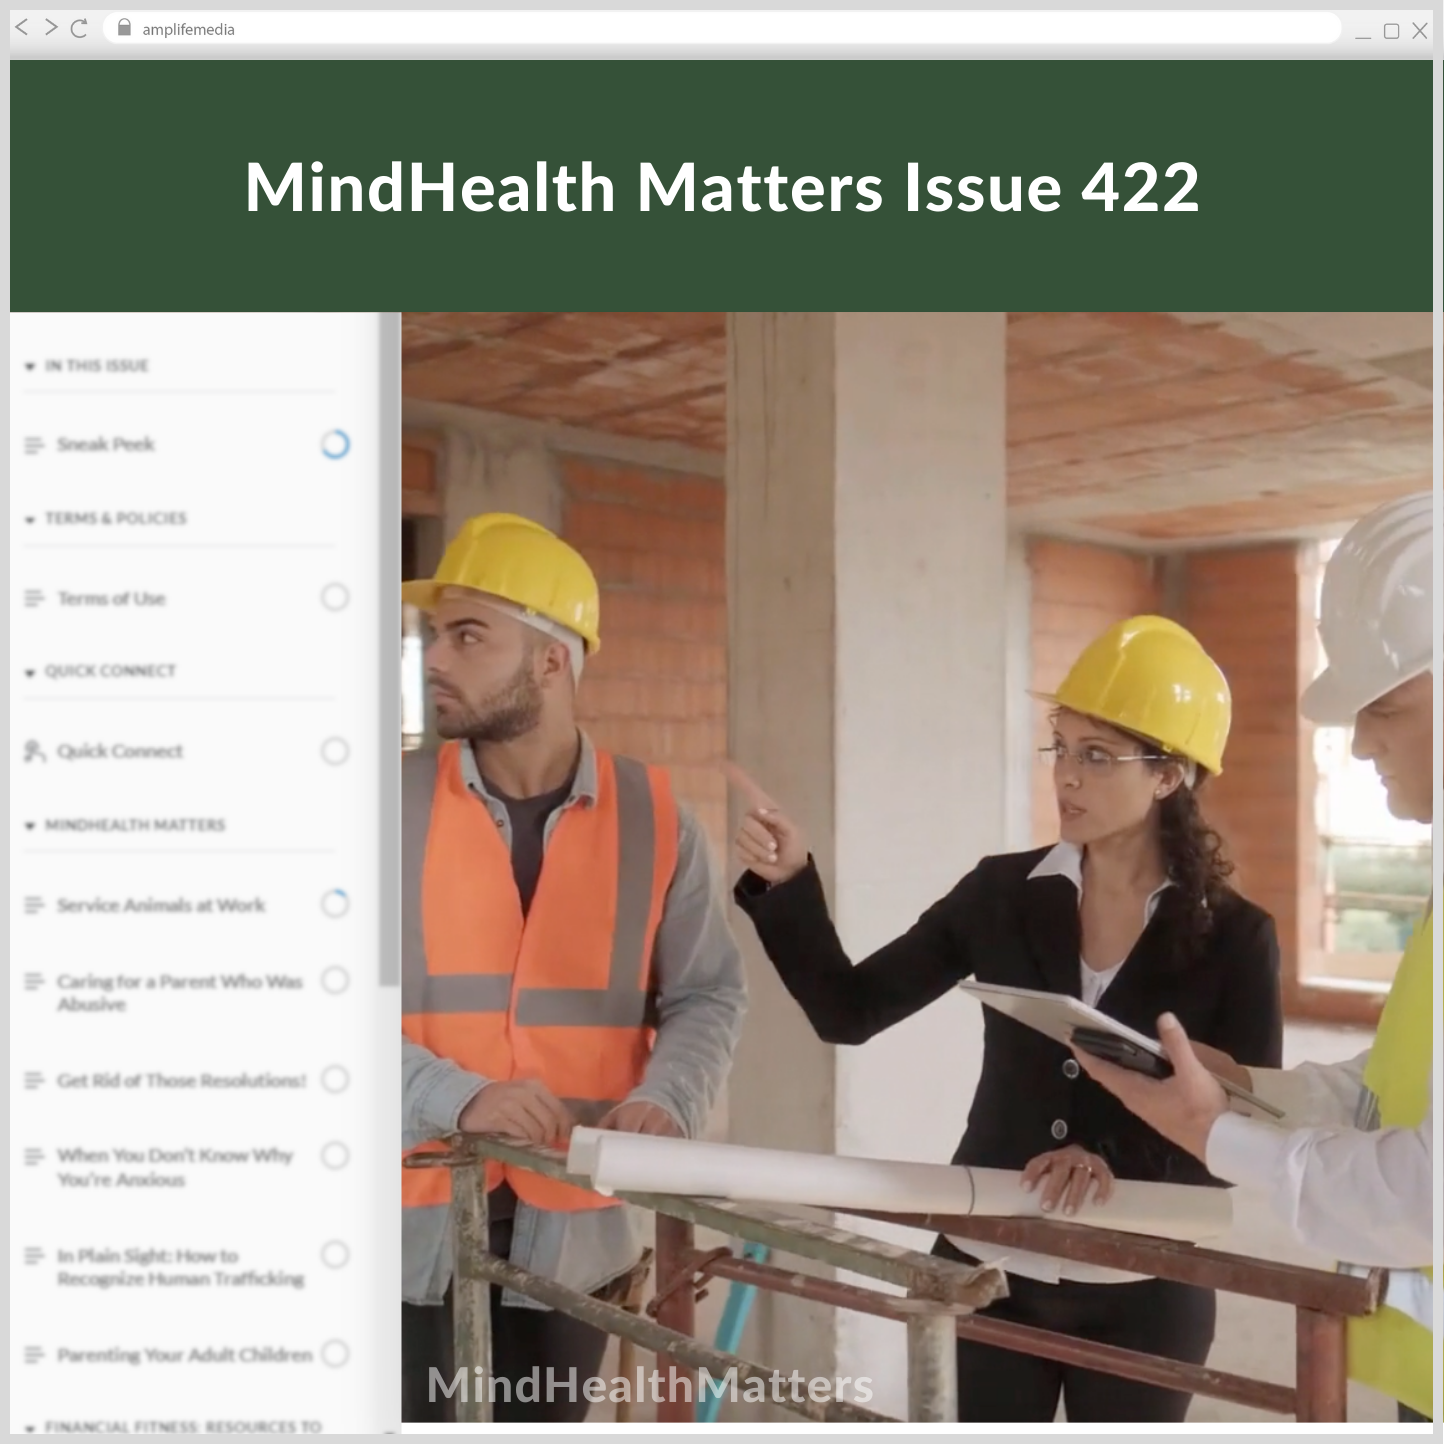 Subscription to Wellbeing Media: MindHealth Matters 422